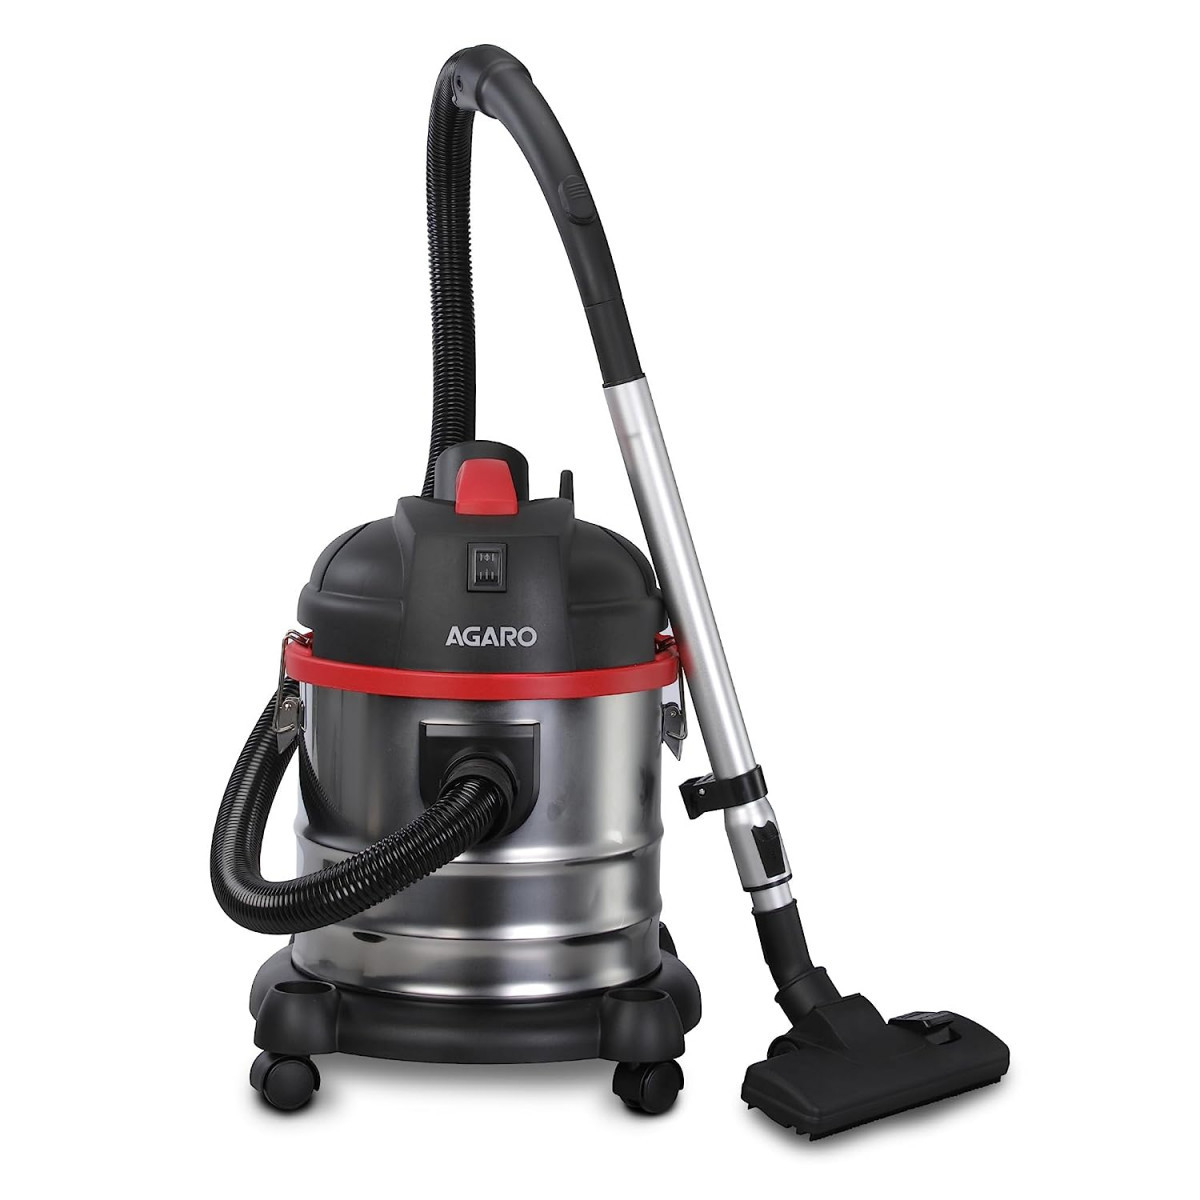 AGARO Ace Wet  Dry Vacuum Cleaner 1600 Watts 215 kPa Suction Power 21 litres Tank Capacity for Home Use Blower Function Washable 3L Dust Bag Stainless Steel Body BlackRedSteel